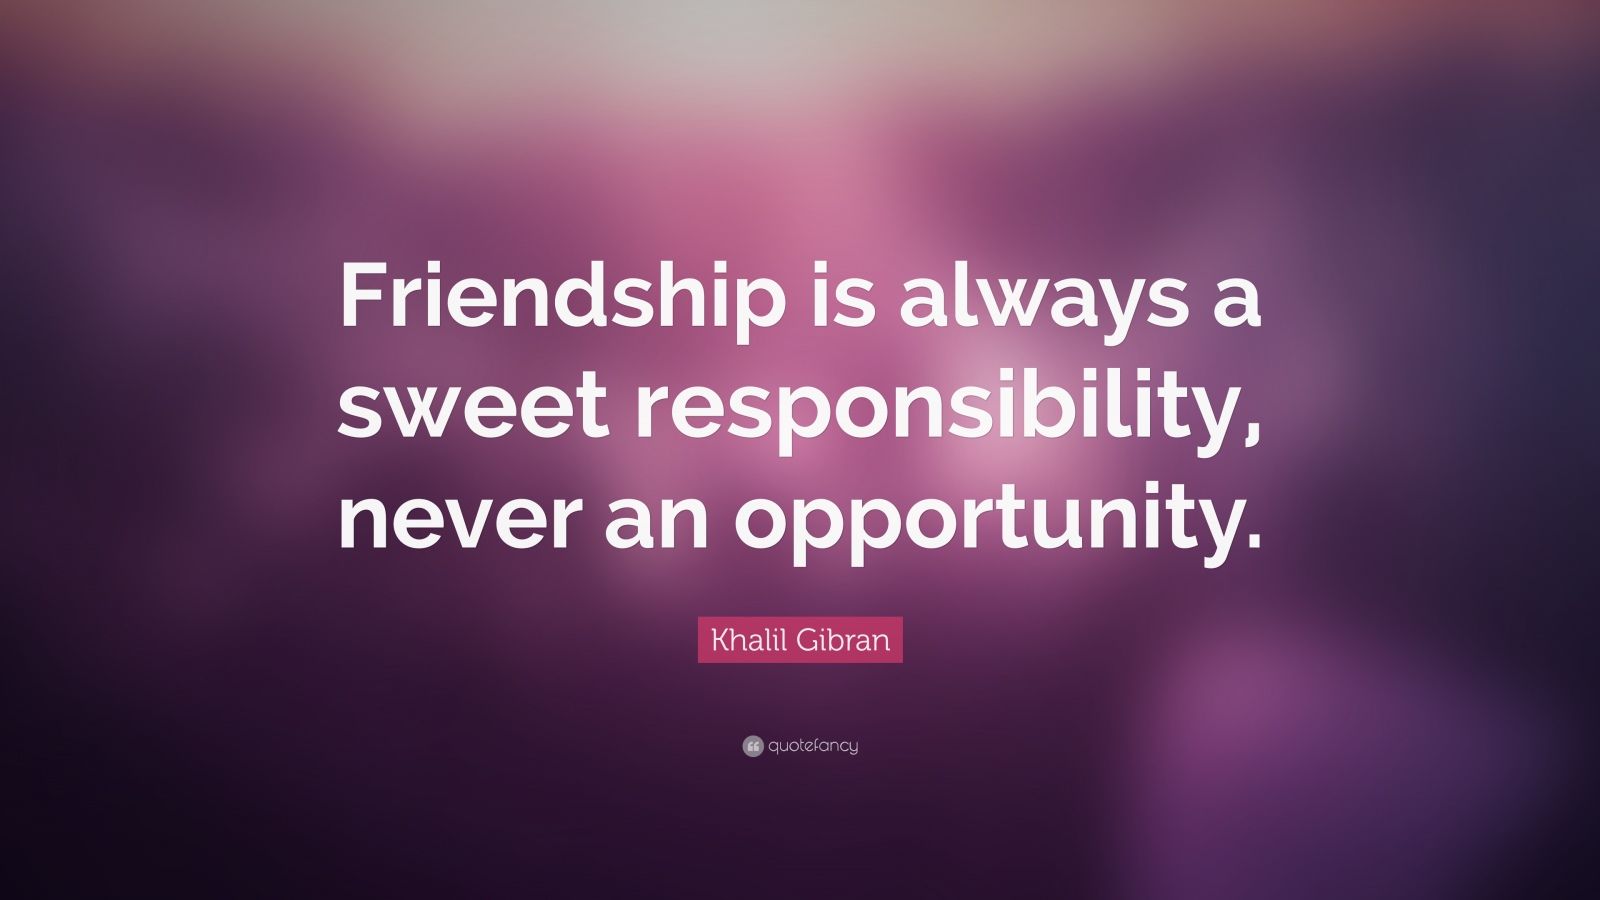 Khalil Gibran Quote: “Friendship is always a sweet responsibility